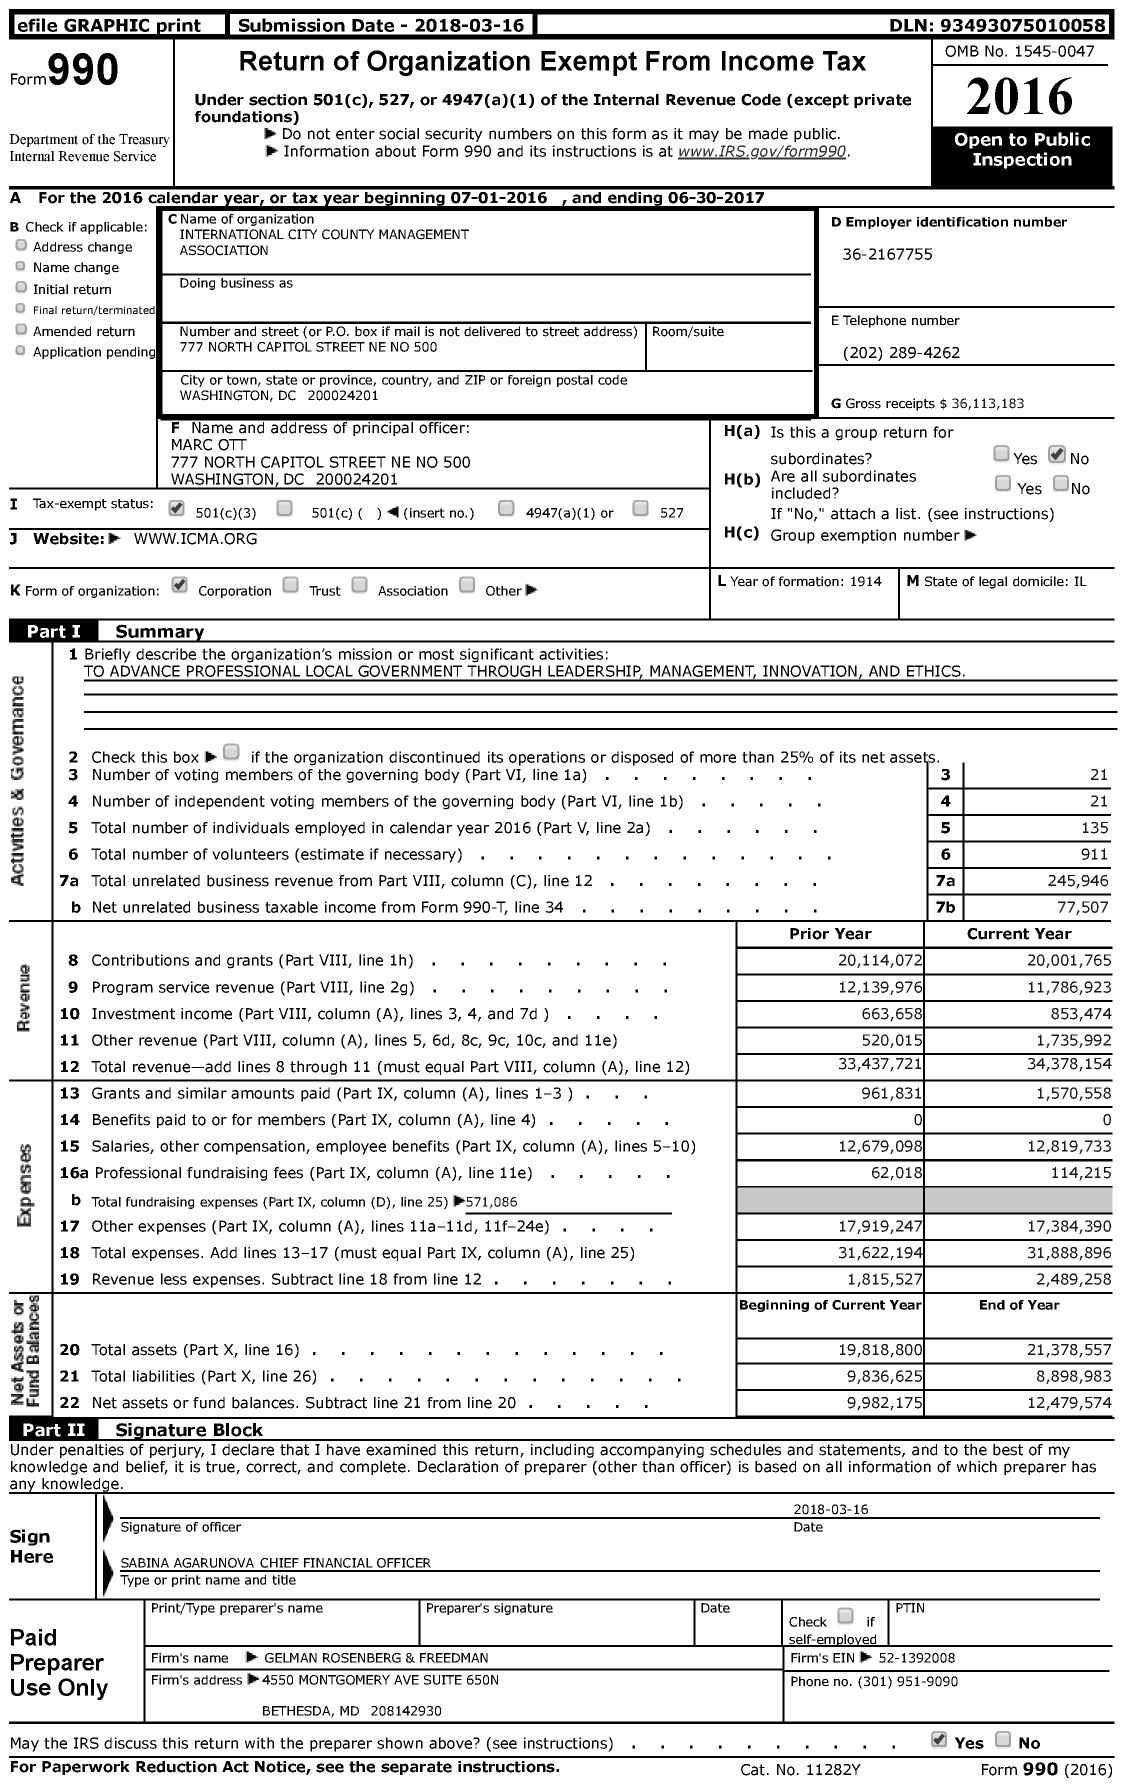 Image of first page of 2016 Form 990 for International Citycounty Management Association